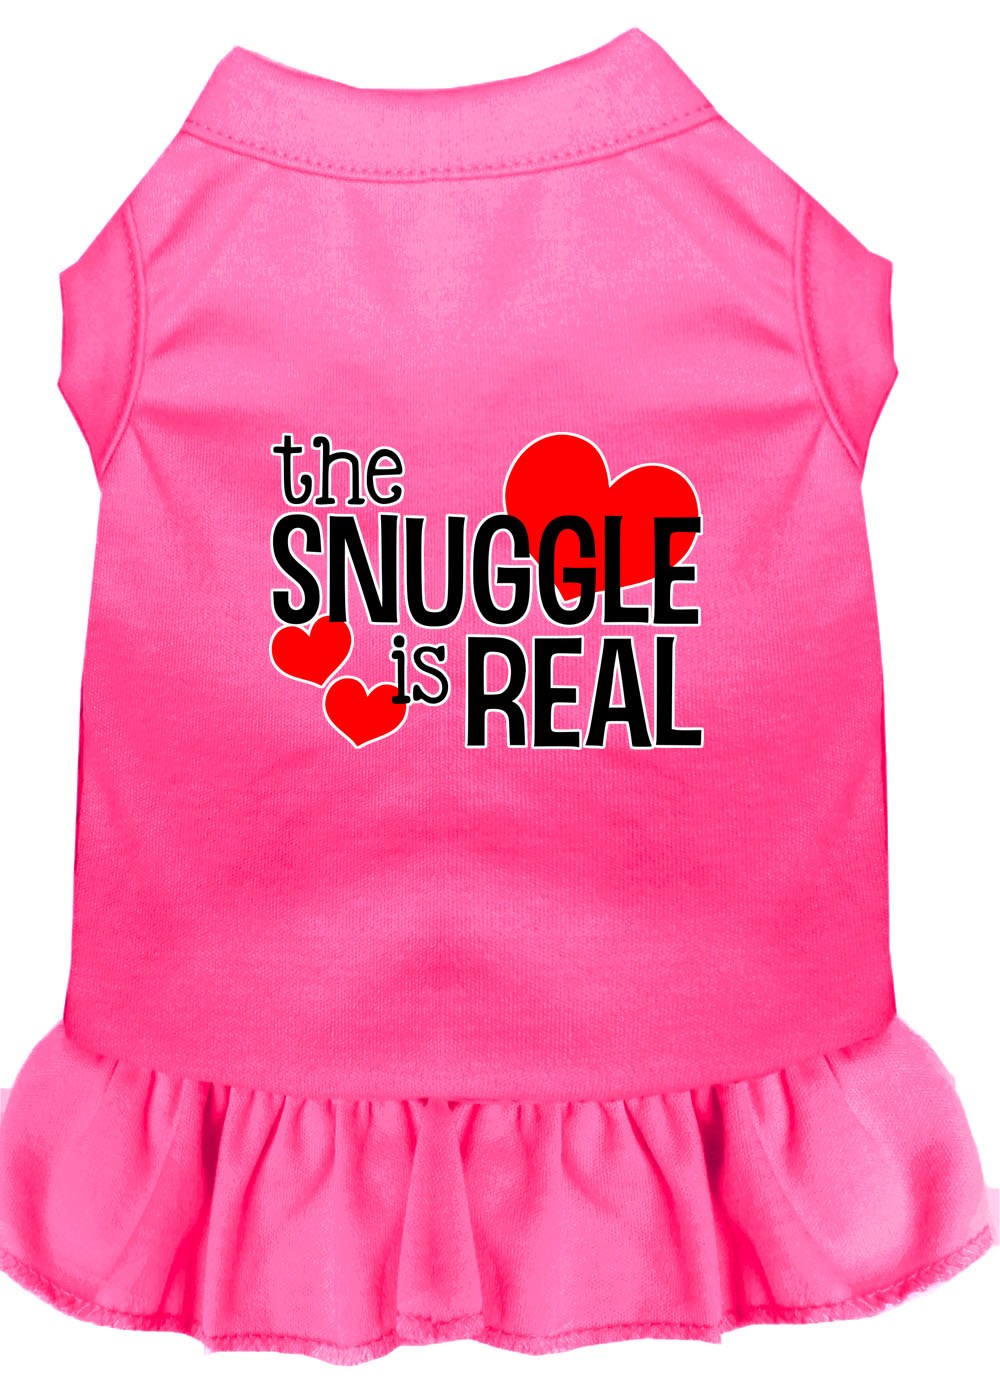 The Snuggle is Real Screen Print Dog Dress Bright Pink XL